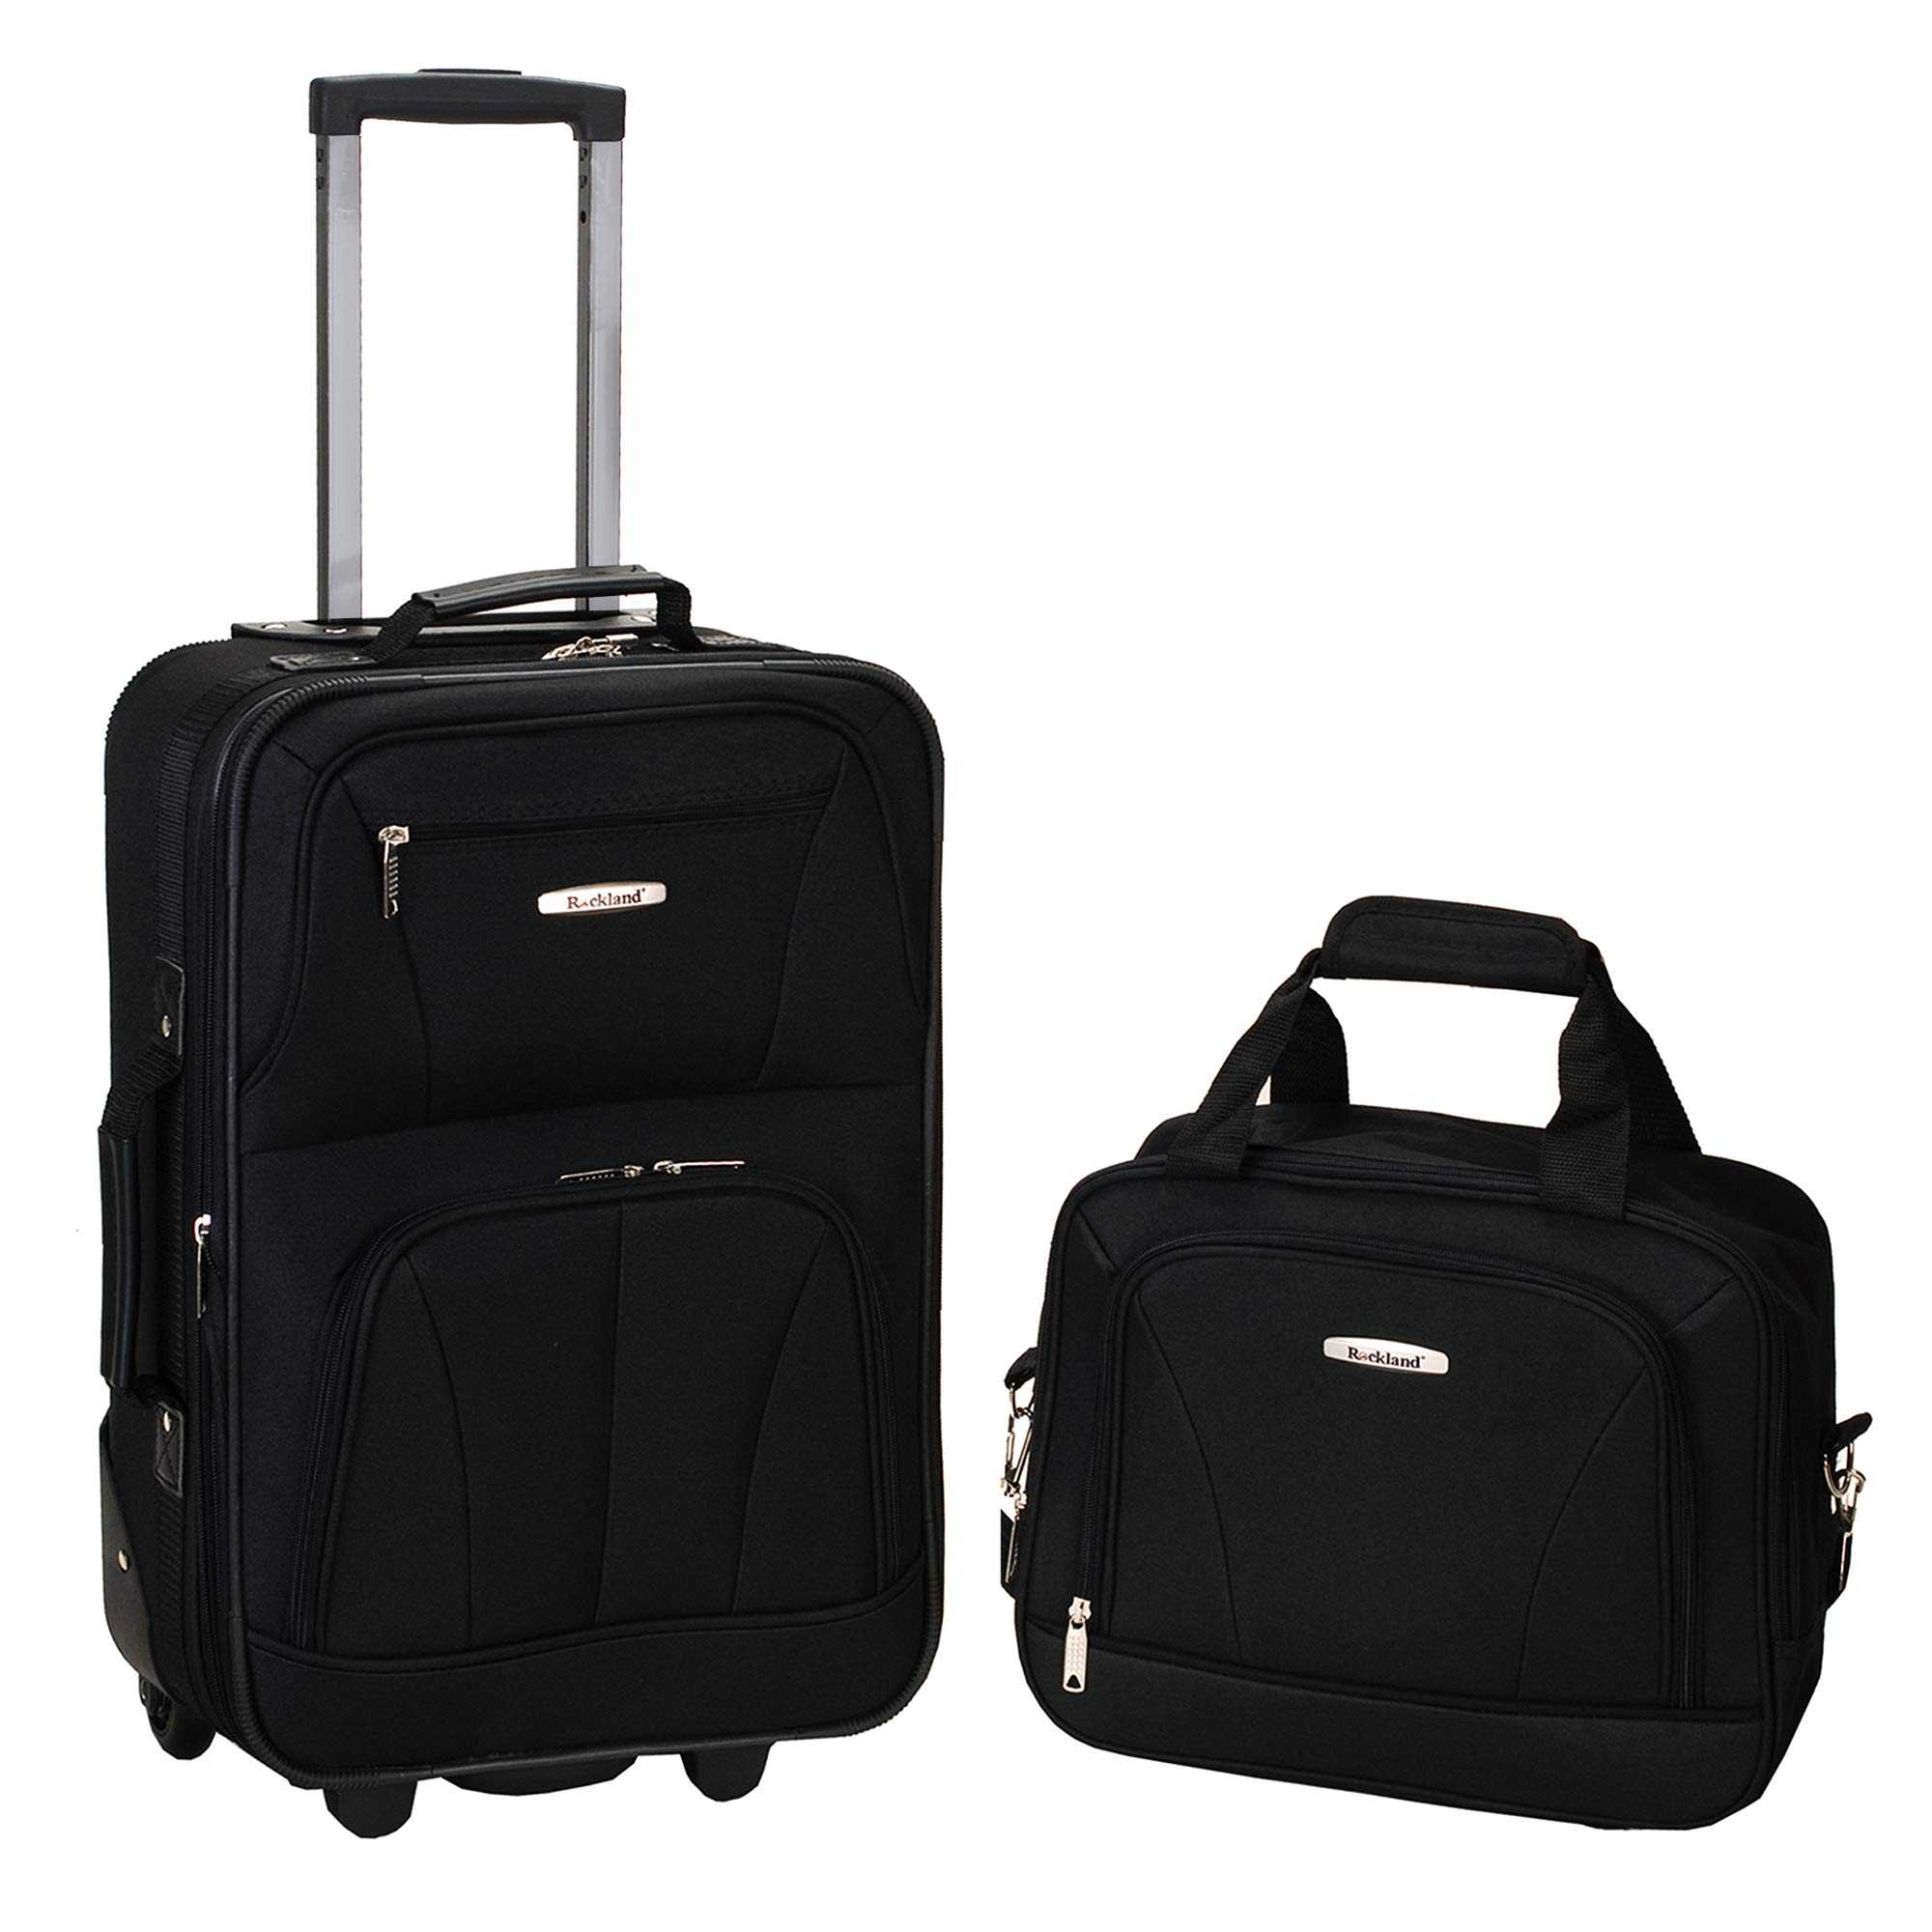 Wrangler 2 Pc. Quest Collection Spinner Travel Luggage Set -Pelican